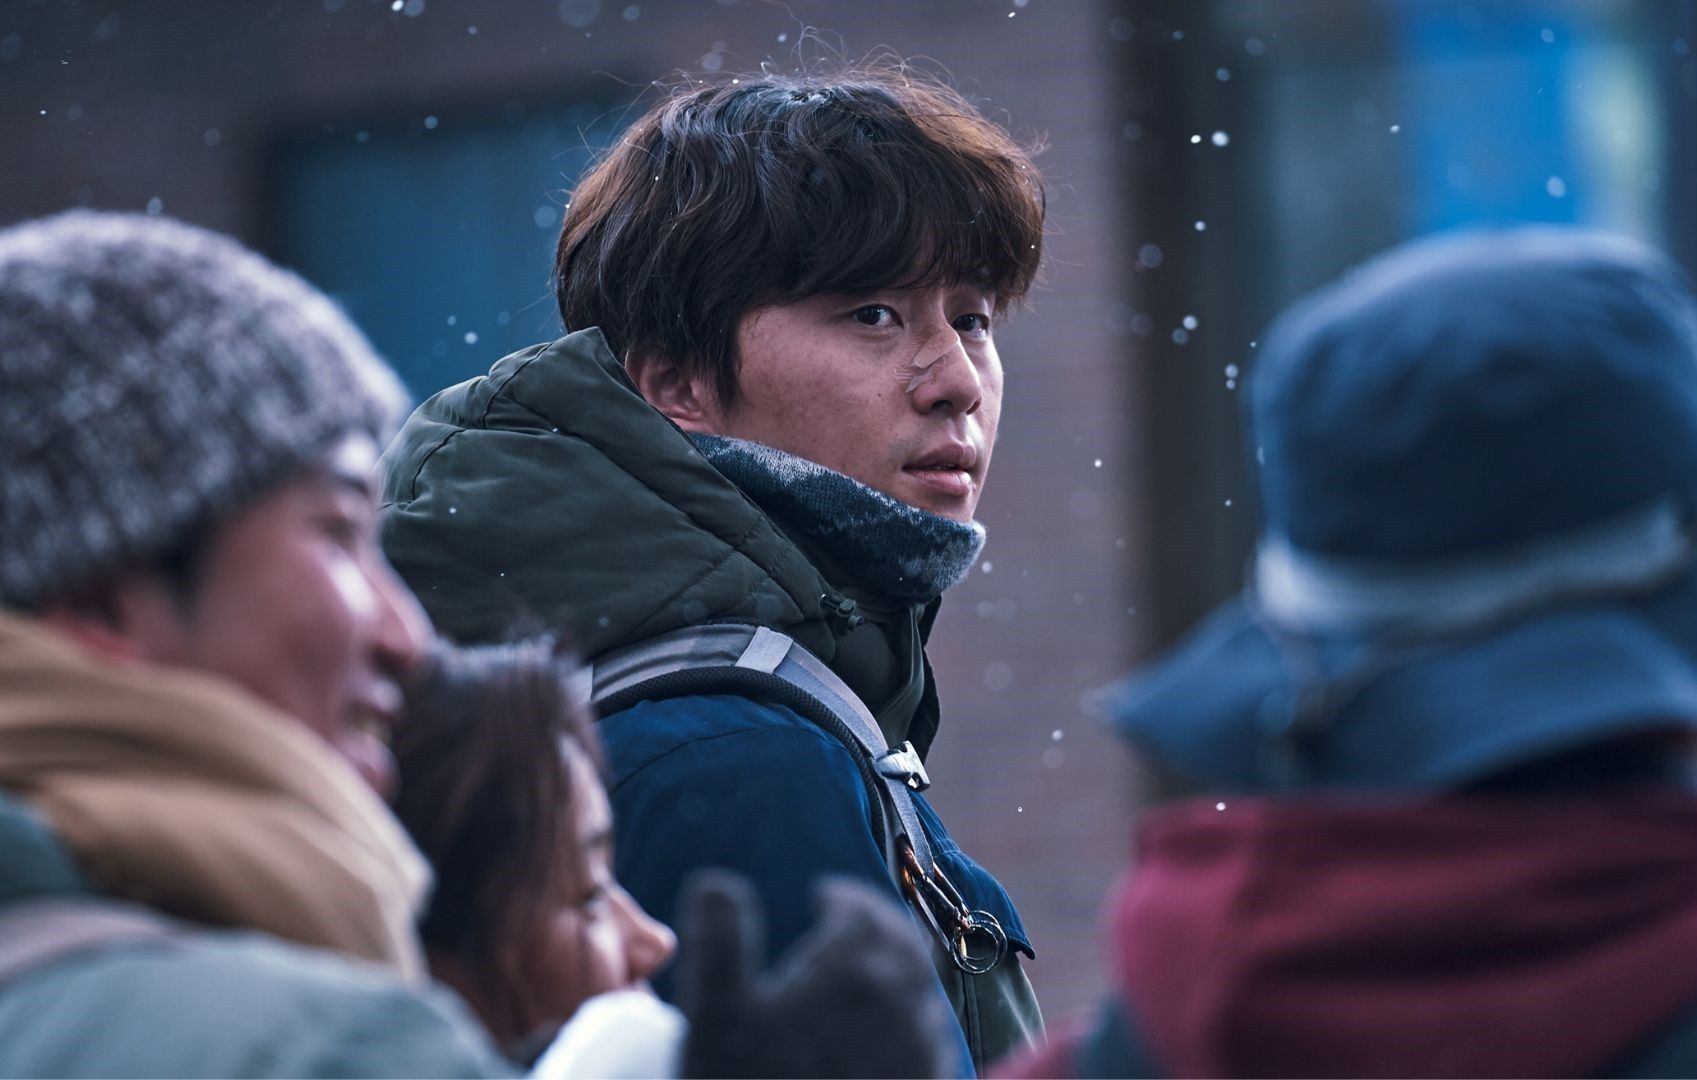 Review: Lee Byung Hun, Park Seo Joon tackle humanity, survival in 'Concrete Utopia'